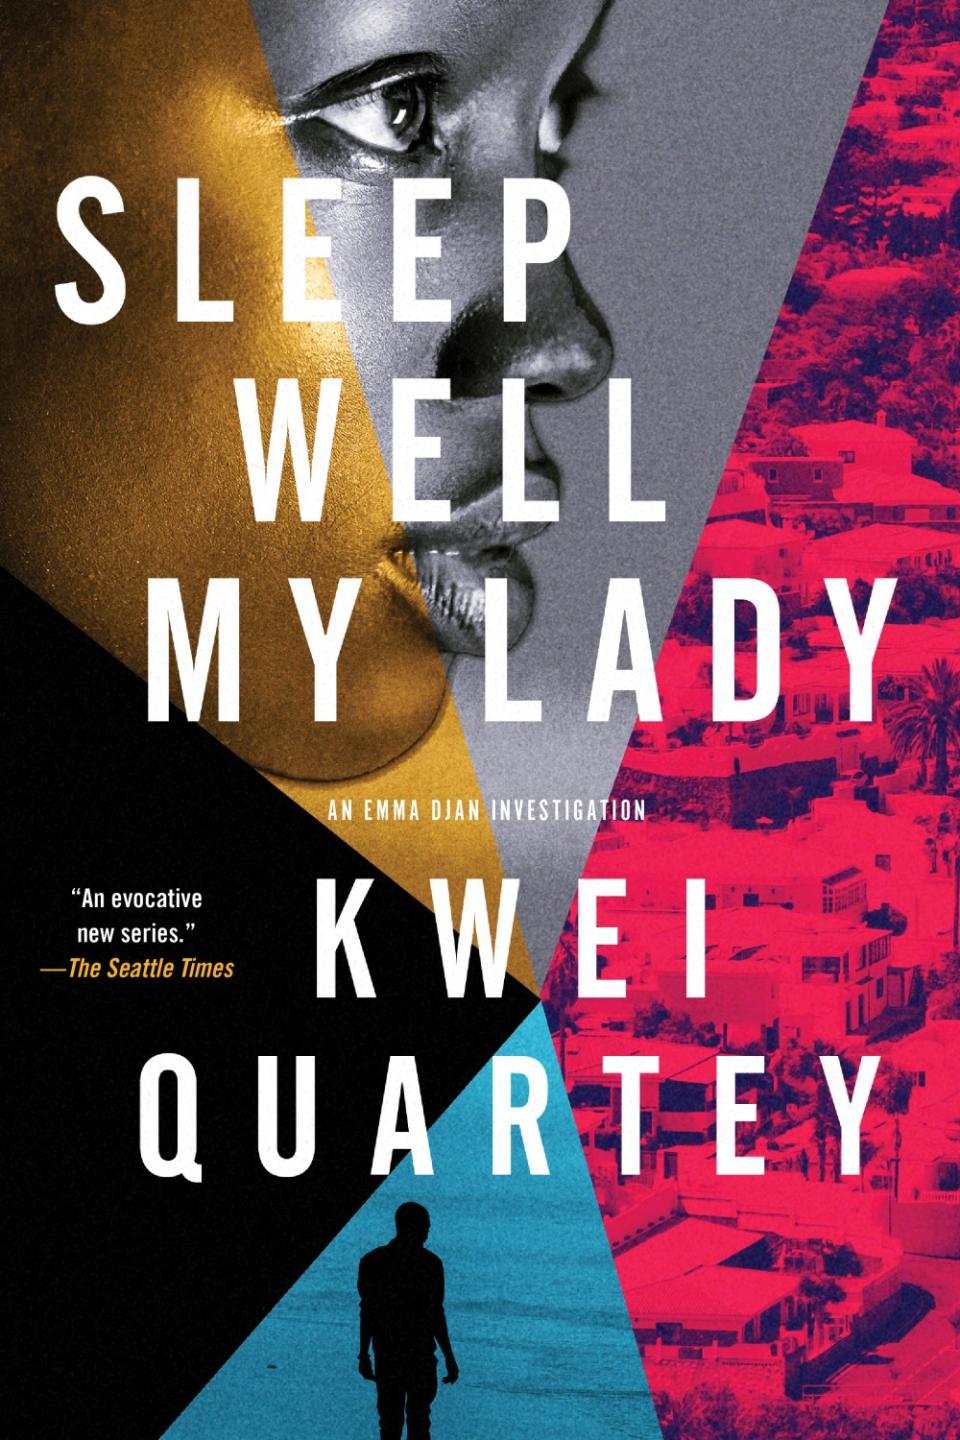 Book jacket for "Sleep Well My Lady" by Kwei Quartey.